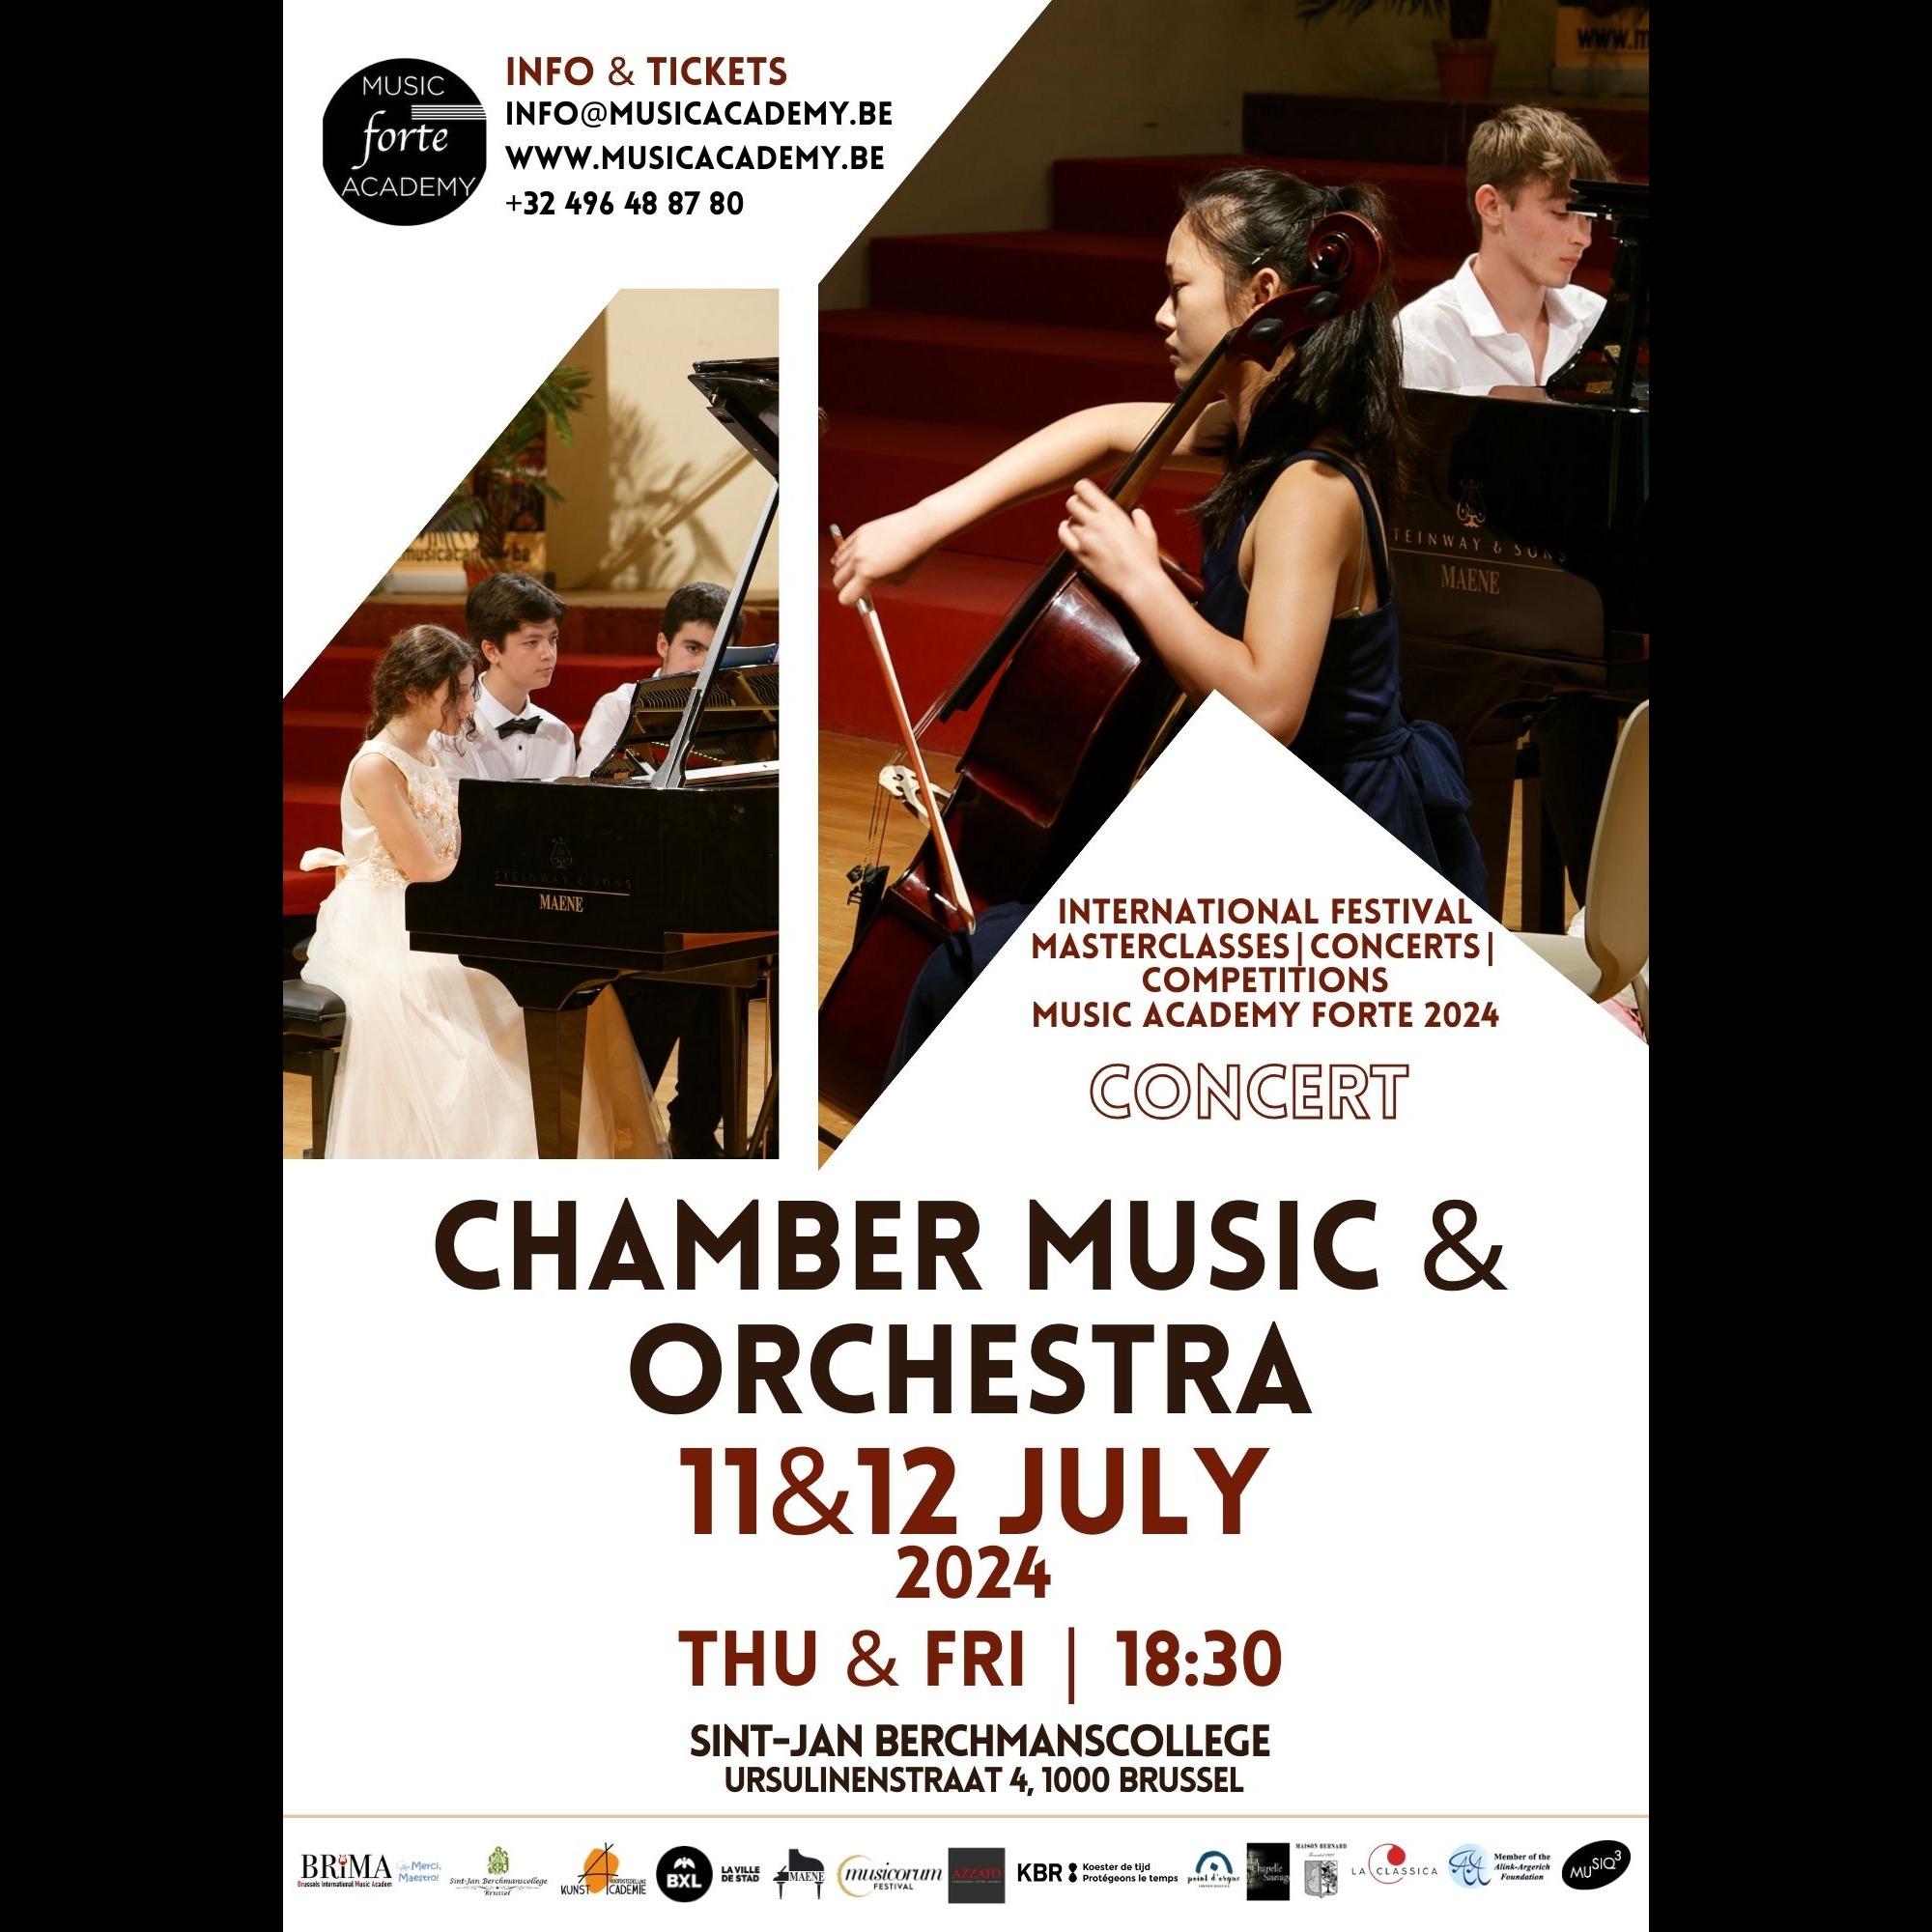 Concert Chamber Music & Orchestra